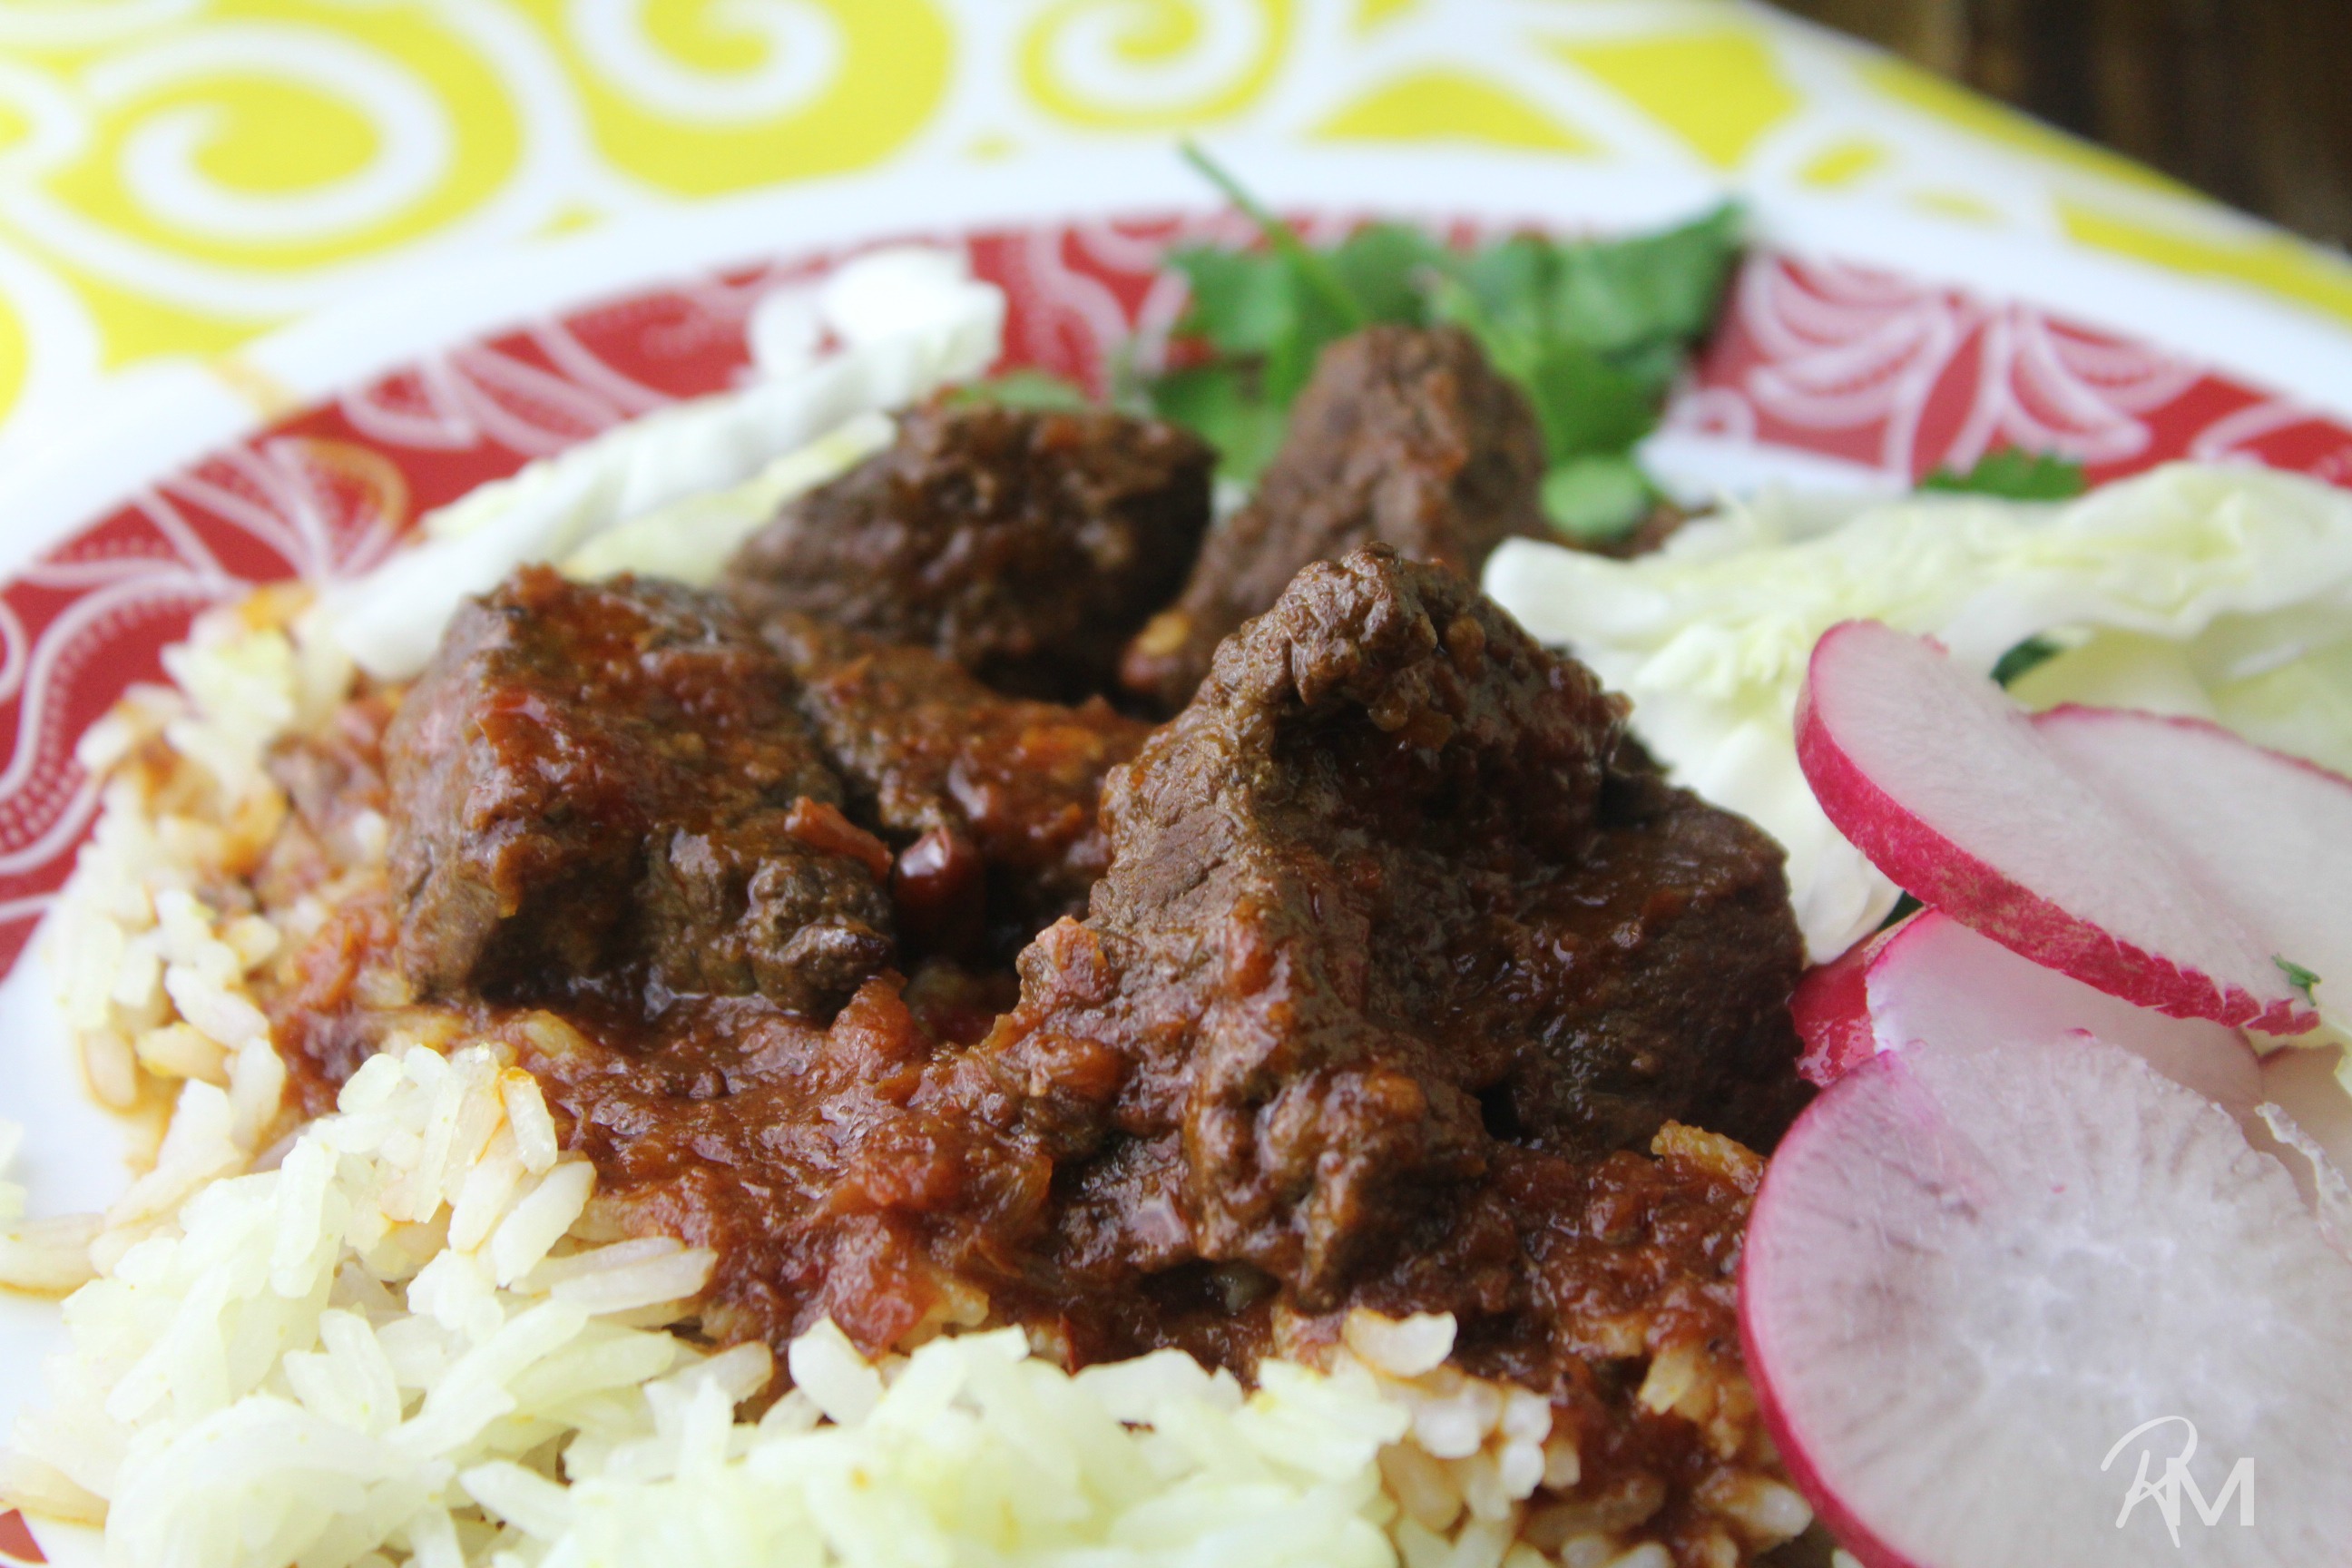 Juicy and soft Carne con Chile Rojo (Beef and Red Chile) cooked up into a deliciously rich, spicy dish suitable for the Instant Pot or stovetop.